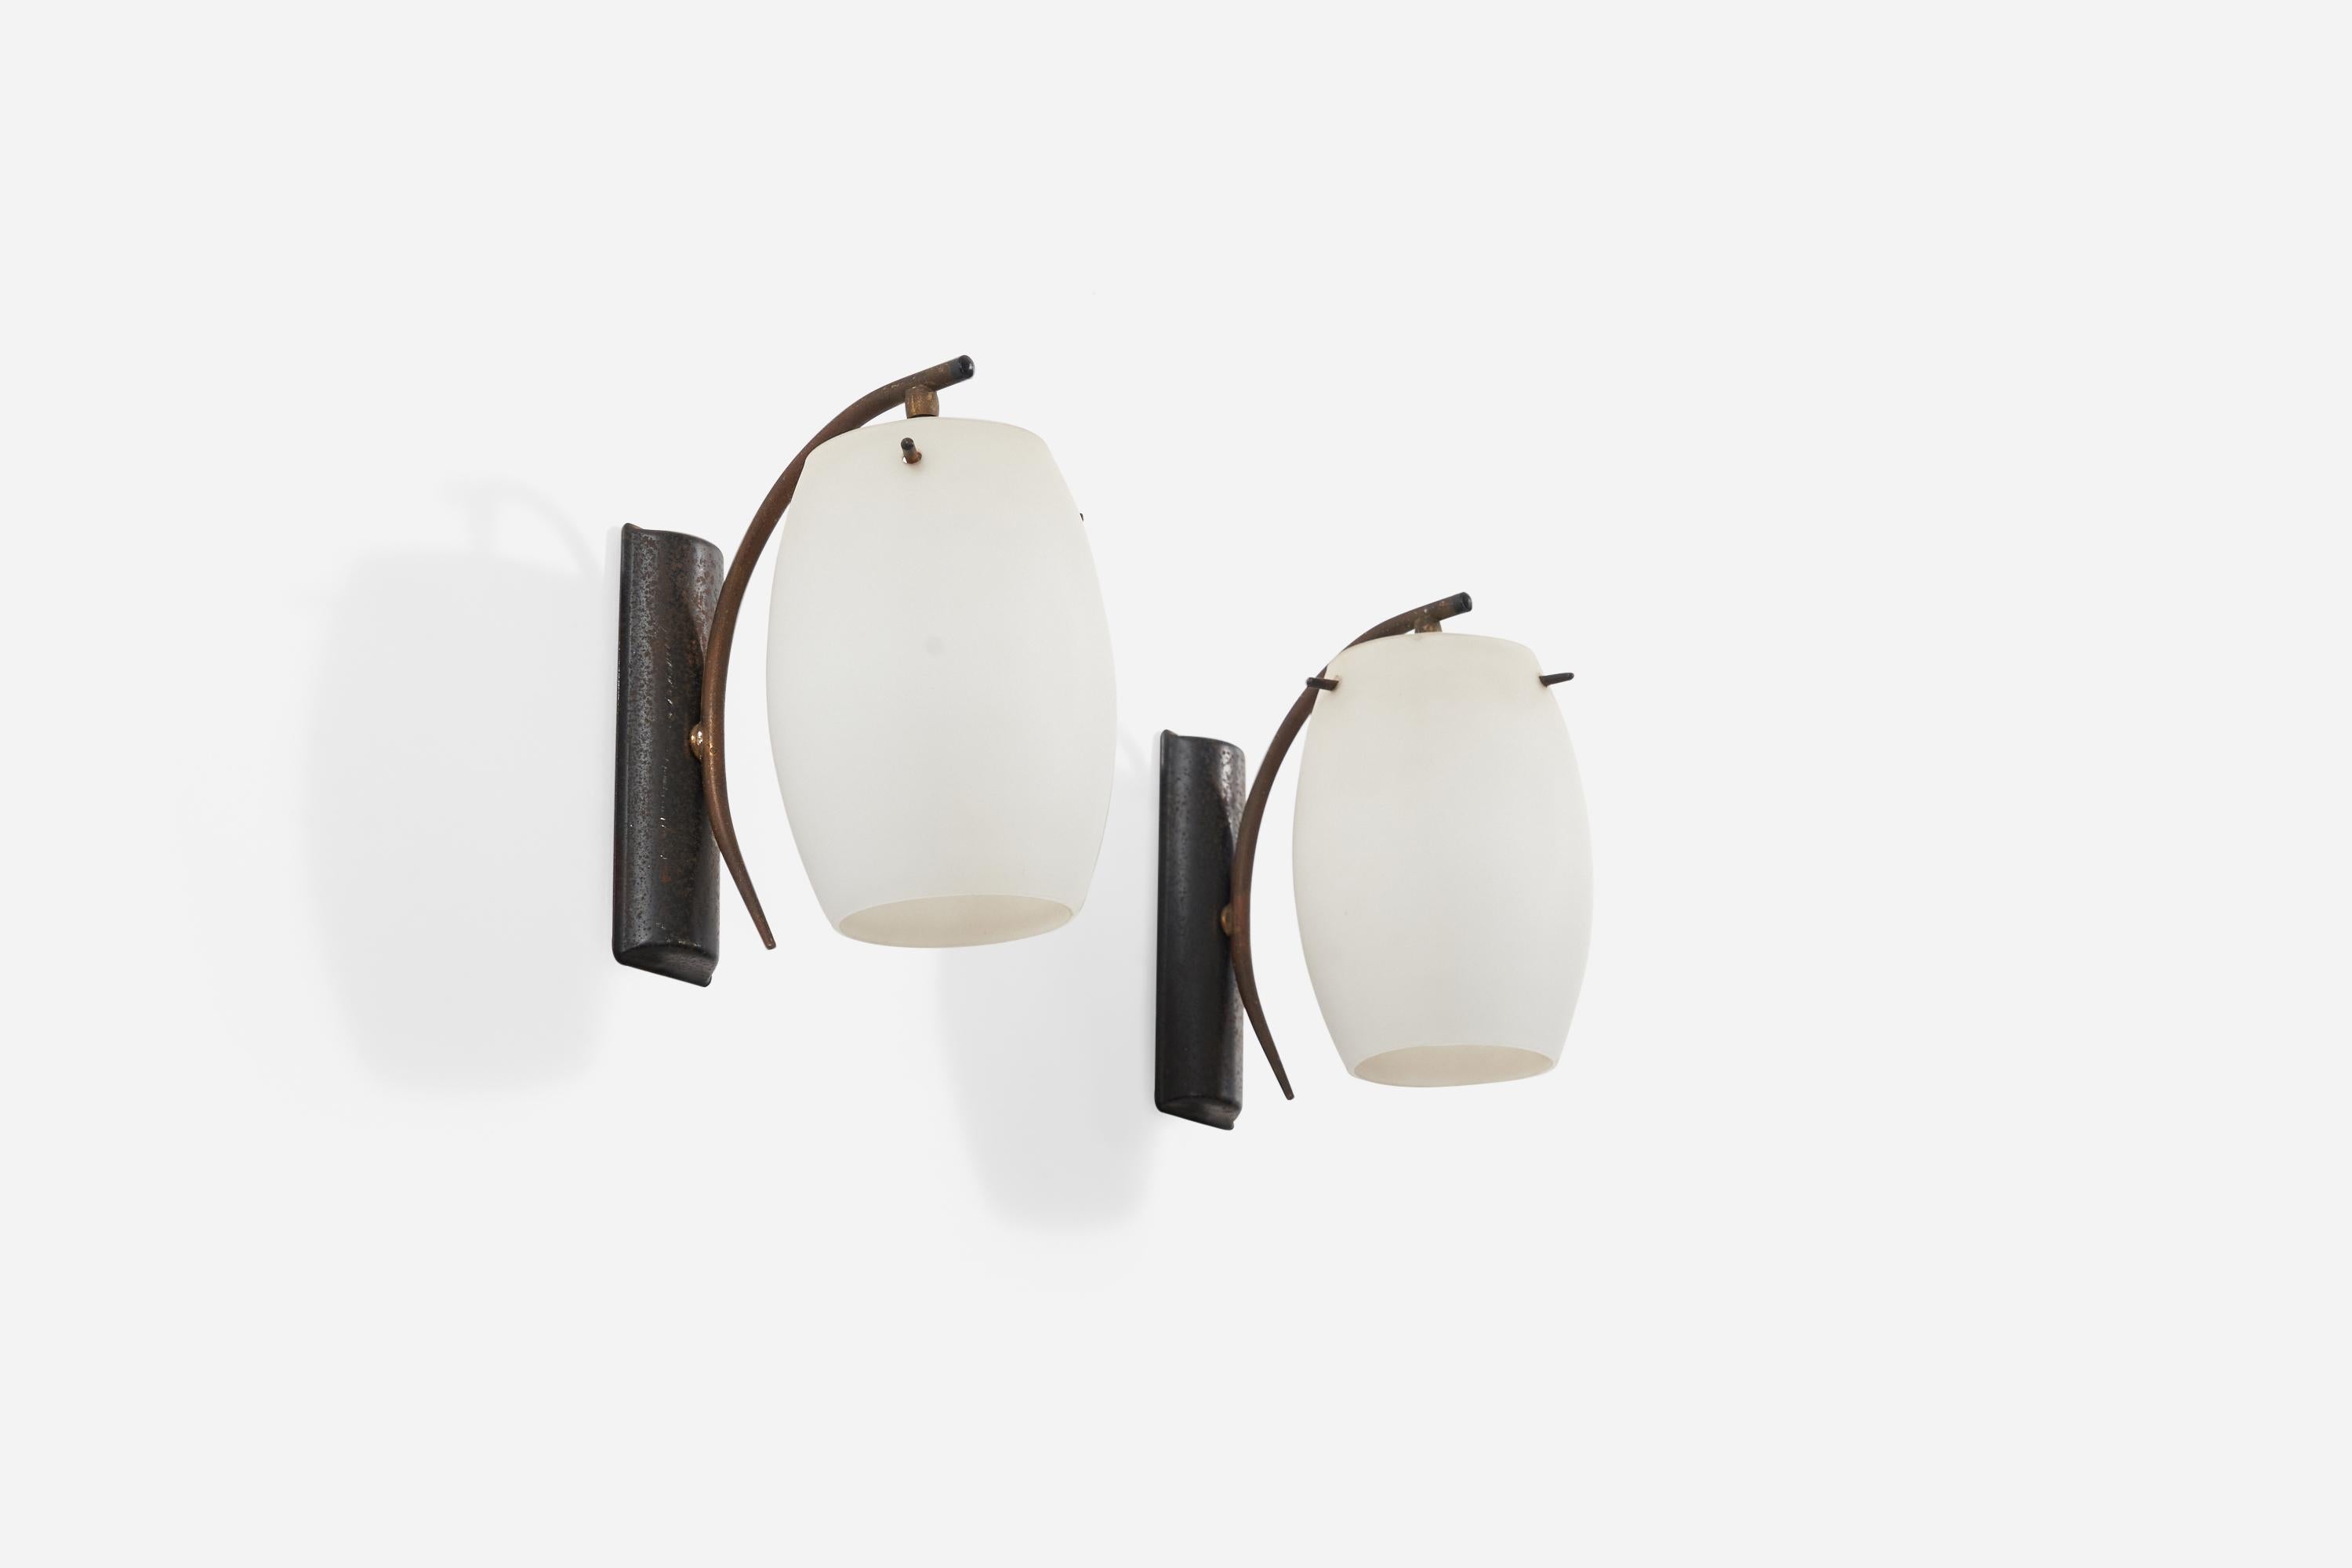 A pair of wall lights in brass, milk glass, and black-lacquered metal designed and produced in Italy, 1950s.